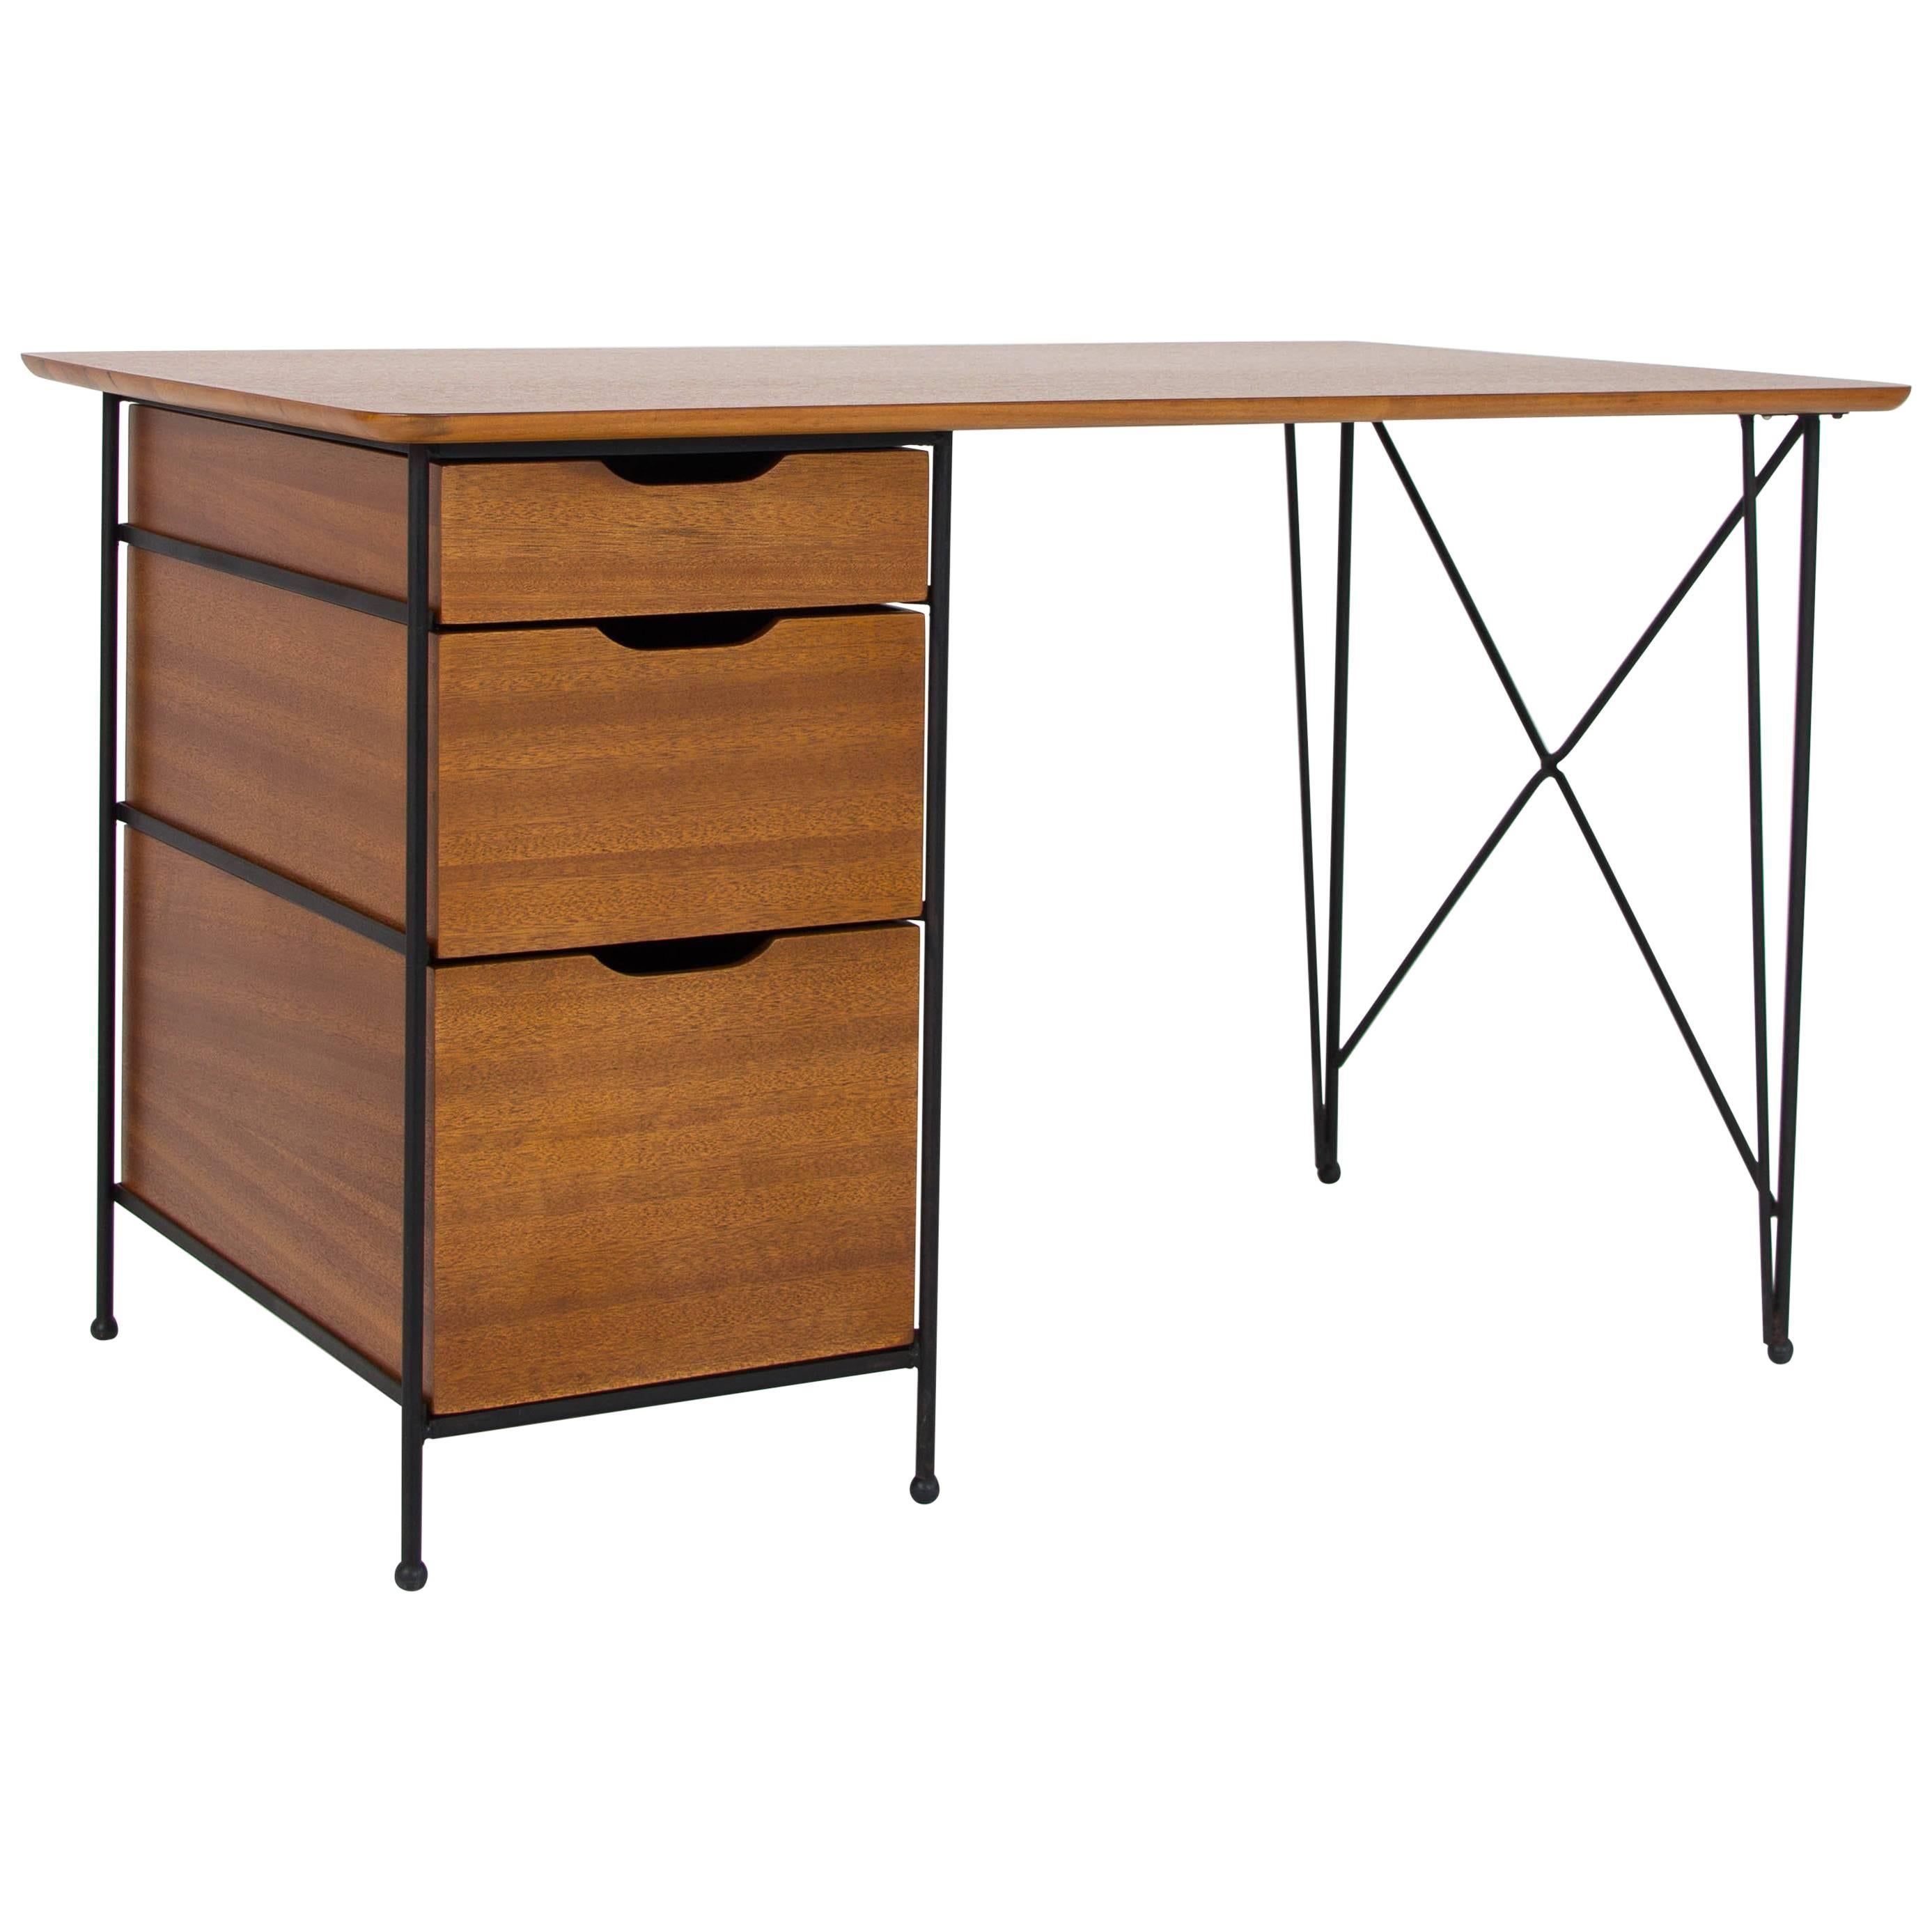 Modernist Desk in Mahogany and Enameled Steel by Vista of California